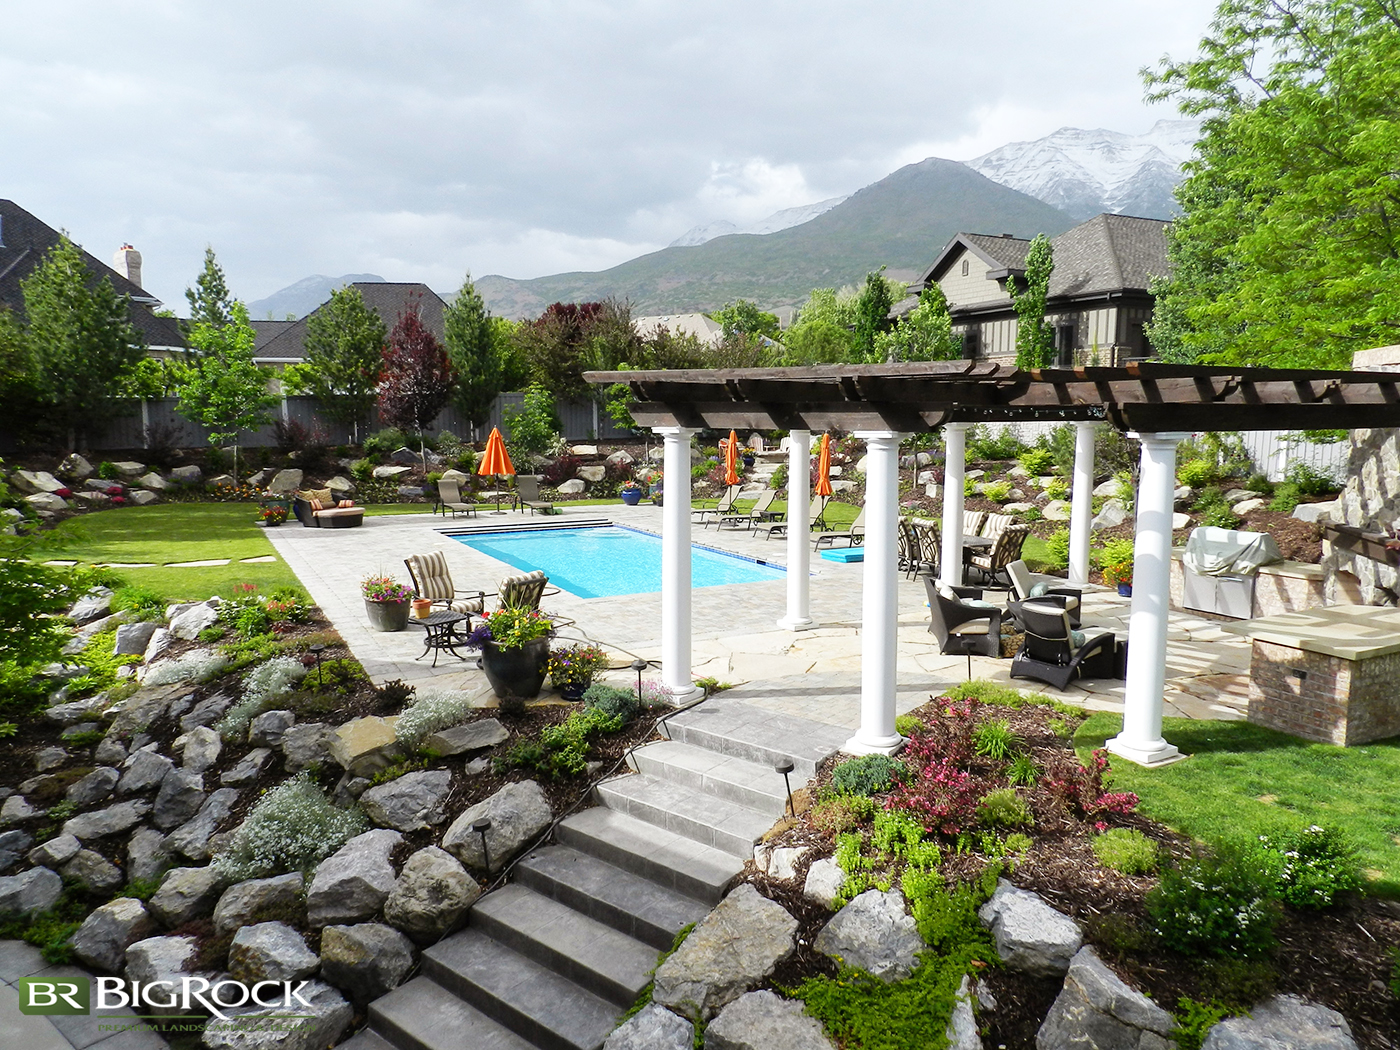 Pergolas may require some additional maintenance. However, the beauty and additional entertaining space that a pergola will add will have you enjoying your yard for years to come.